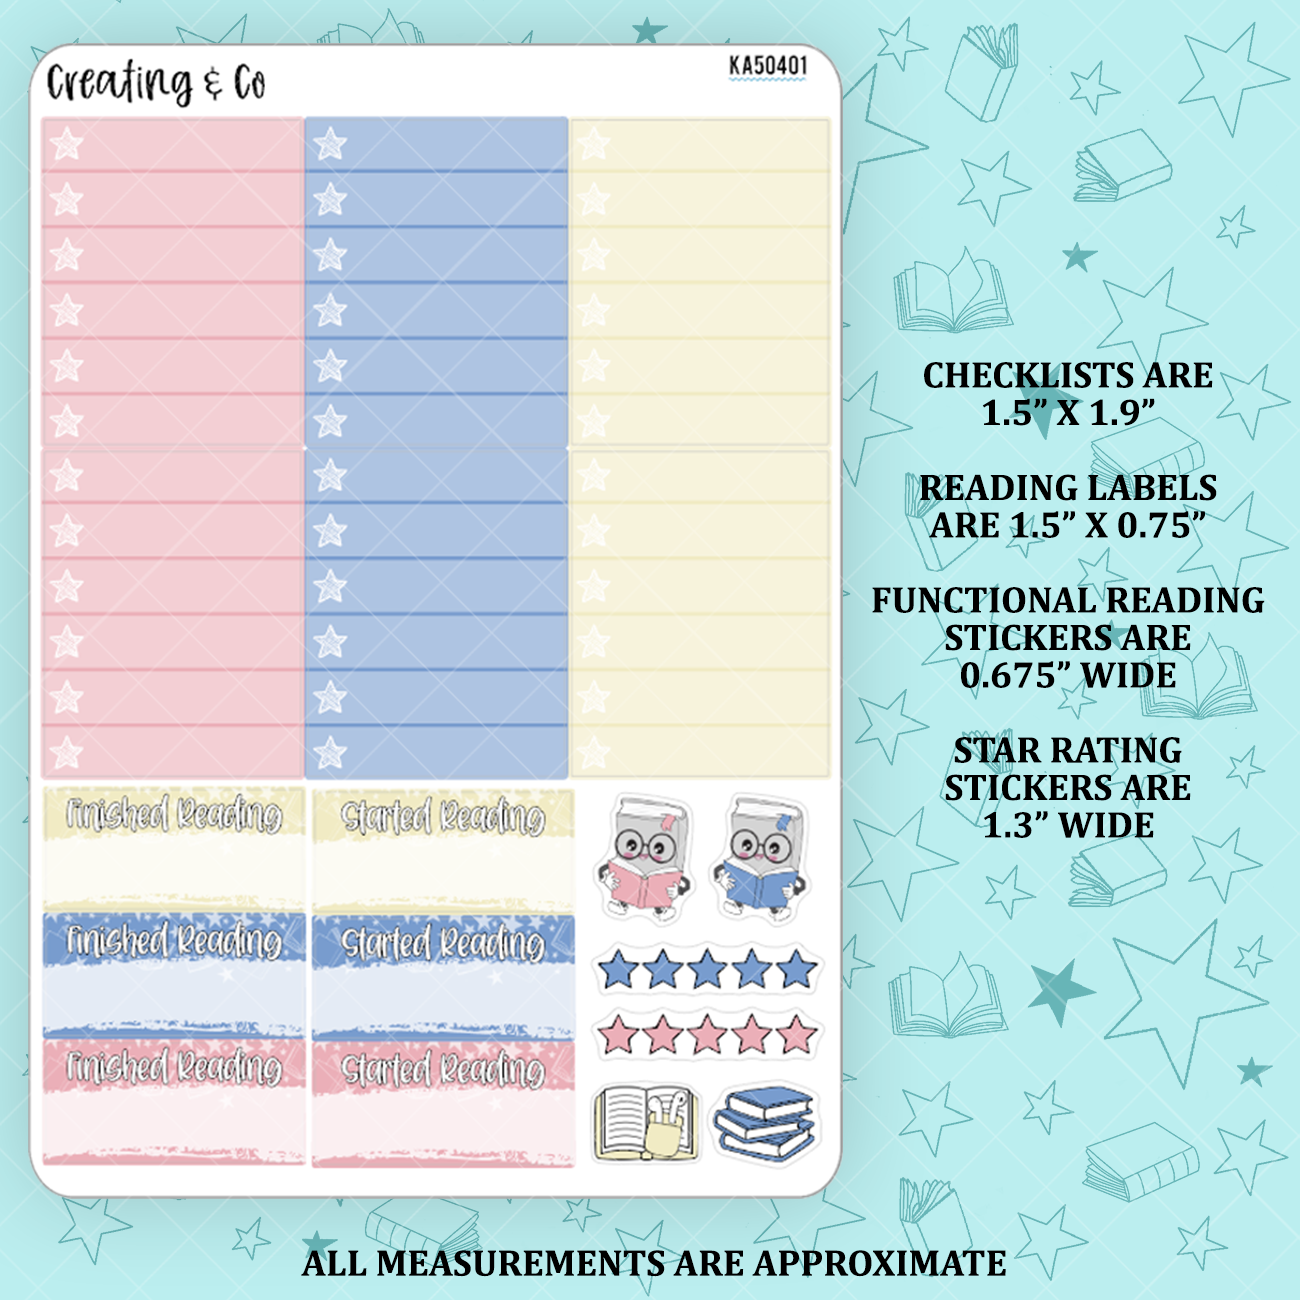 Booked for Valentine's Day Checklists + Reading Sticker Kit Add On for Weekly Planner Kit  - KA50401